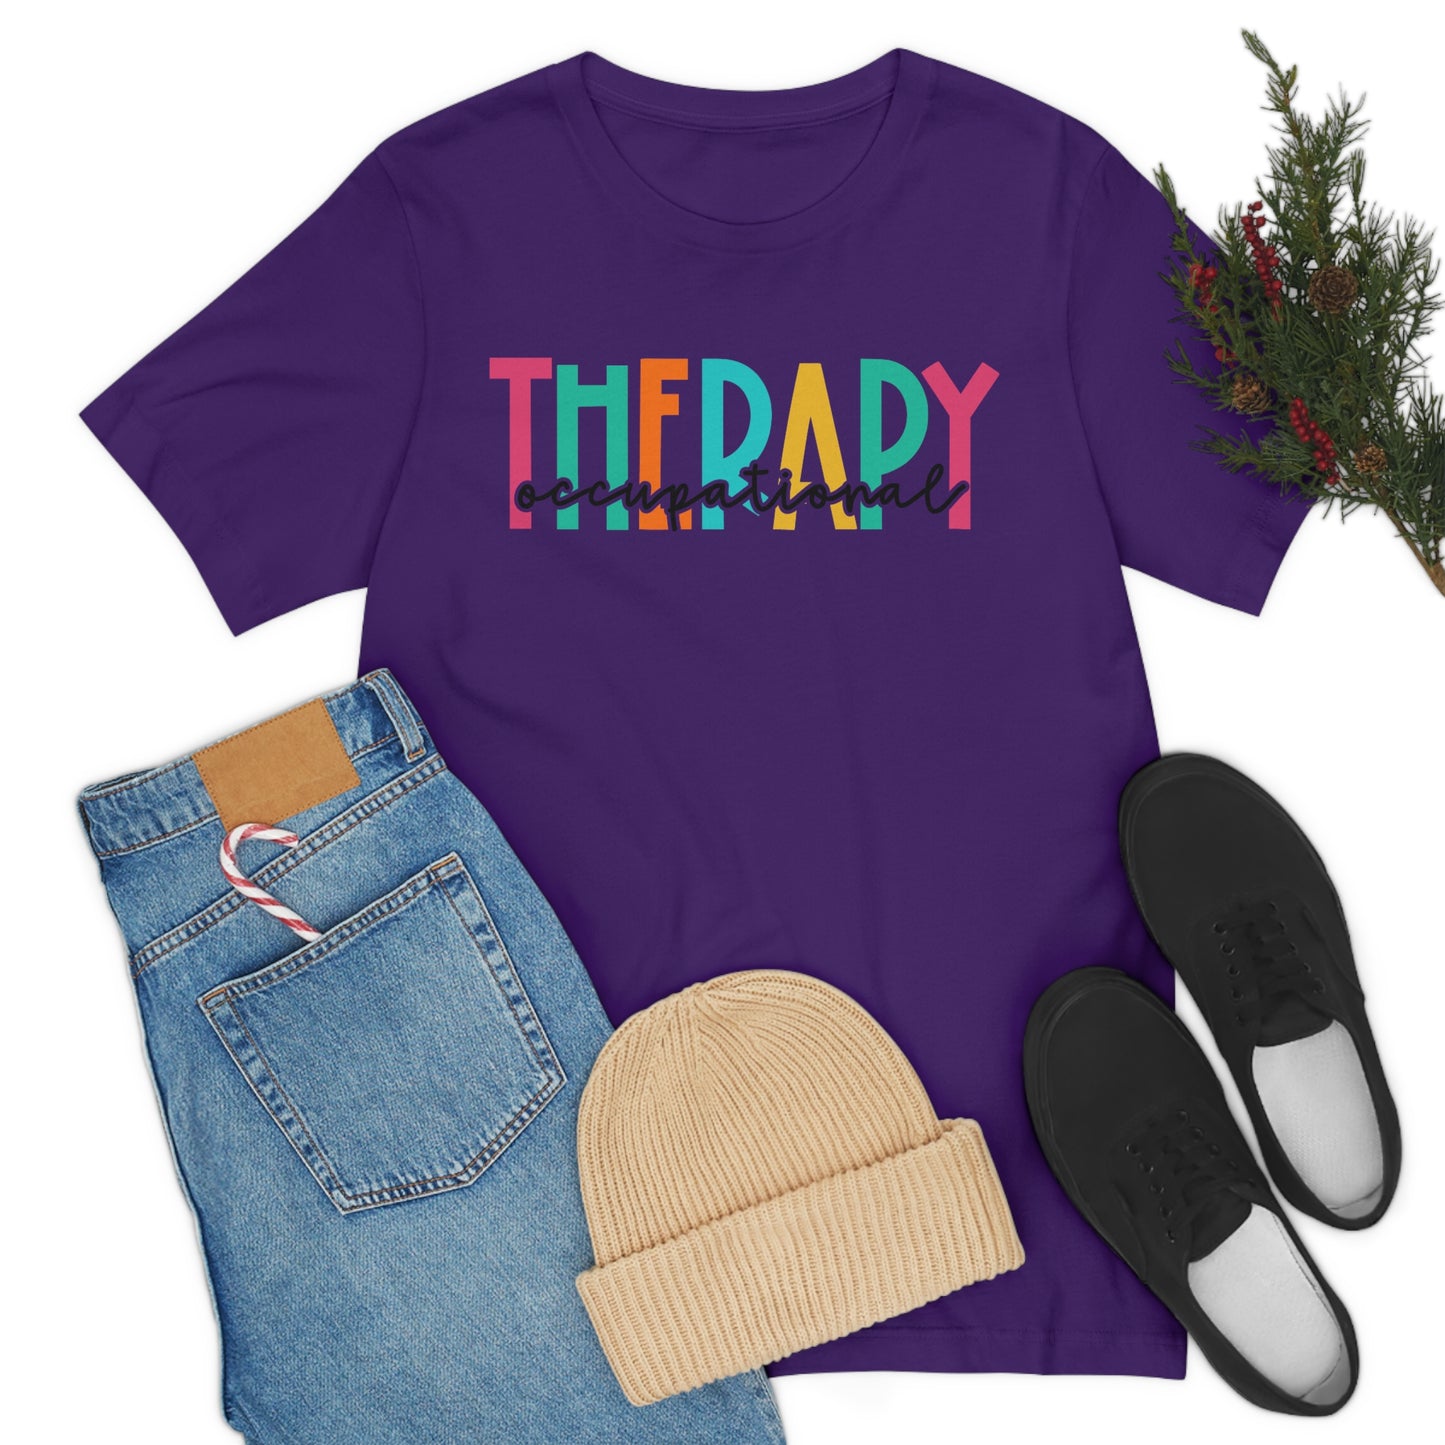 Occupational Therapy Shirt, Therapy Shirt, gift for therapist, OT, PT, slp, cota, pta, tops and tees, women's shirts, rehab team